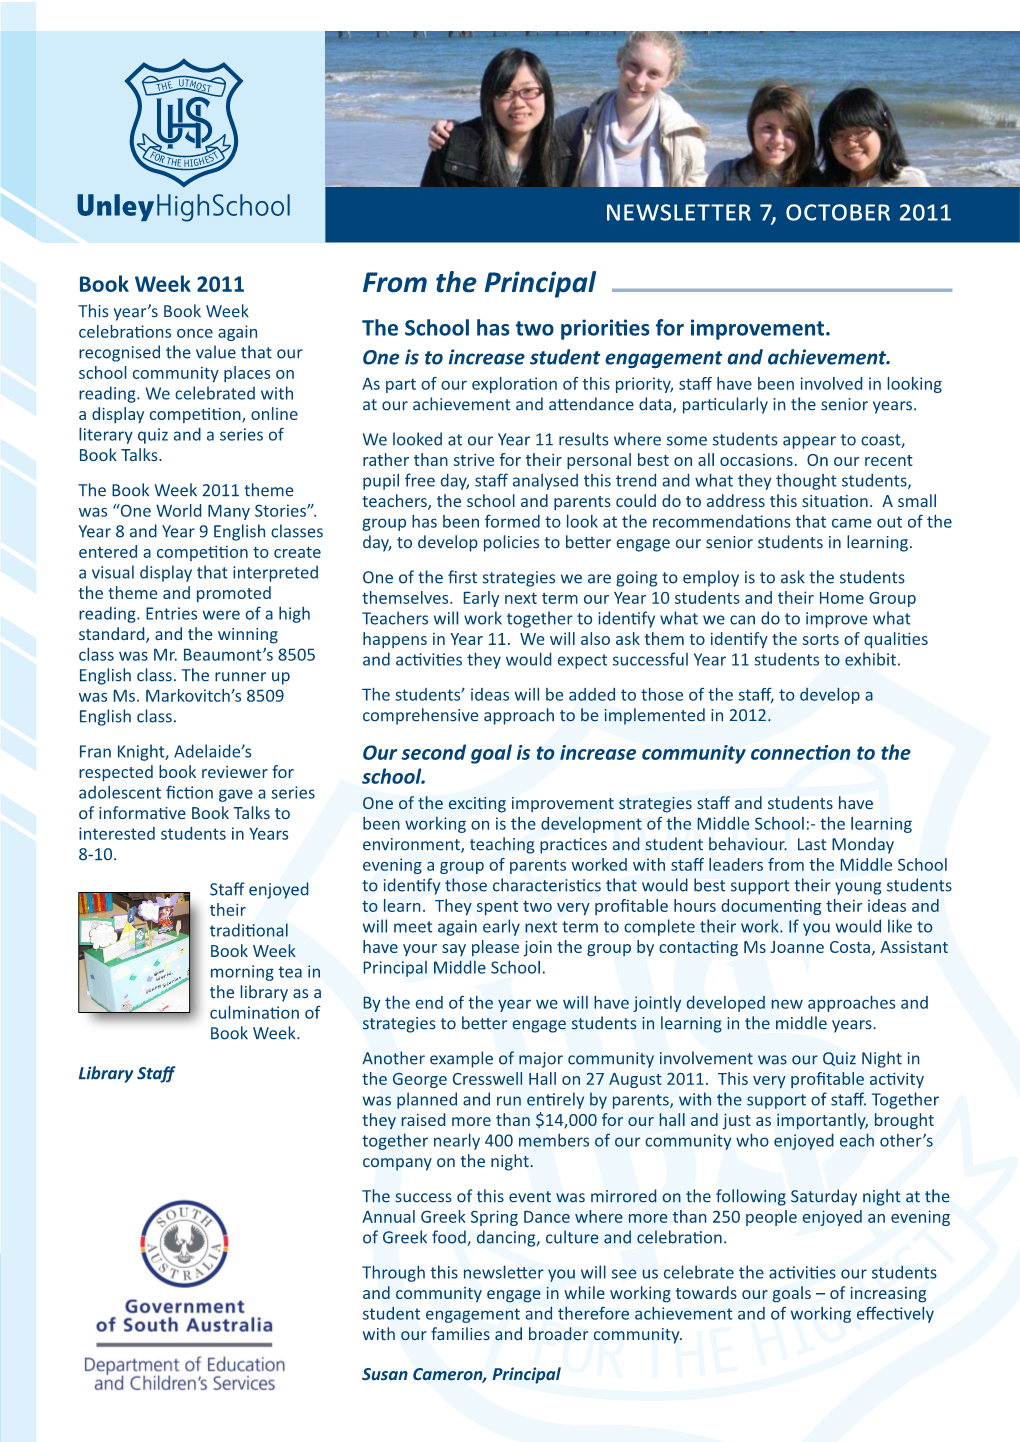 From the Principal. Newsletter 7, October 2011